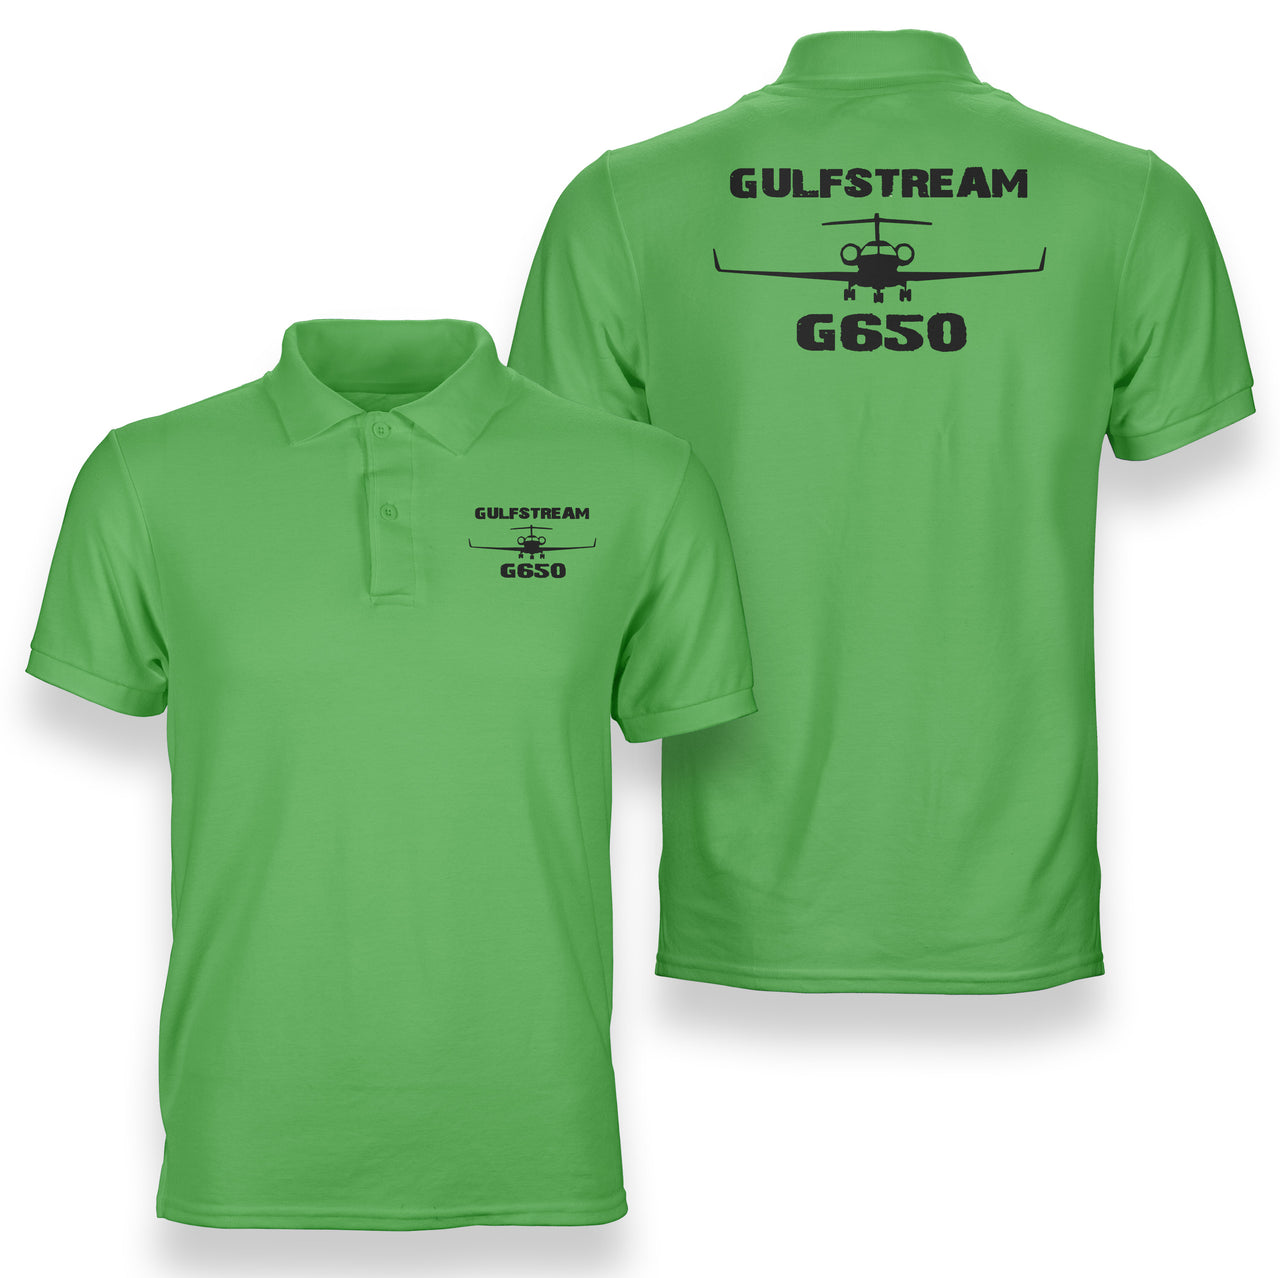 Gulfstream G650 & Plane Designed Double Side Polo T-Shirts